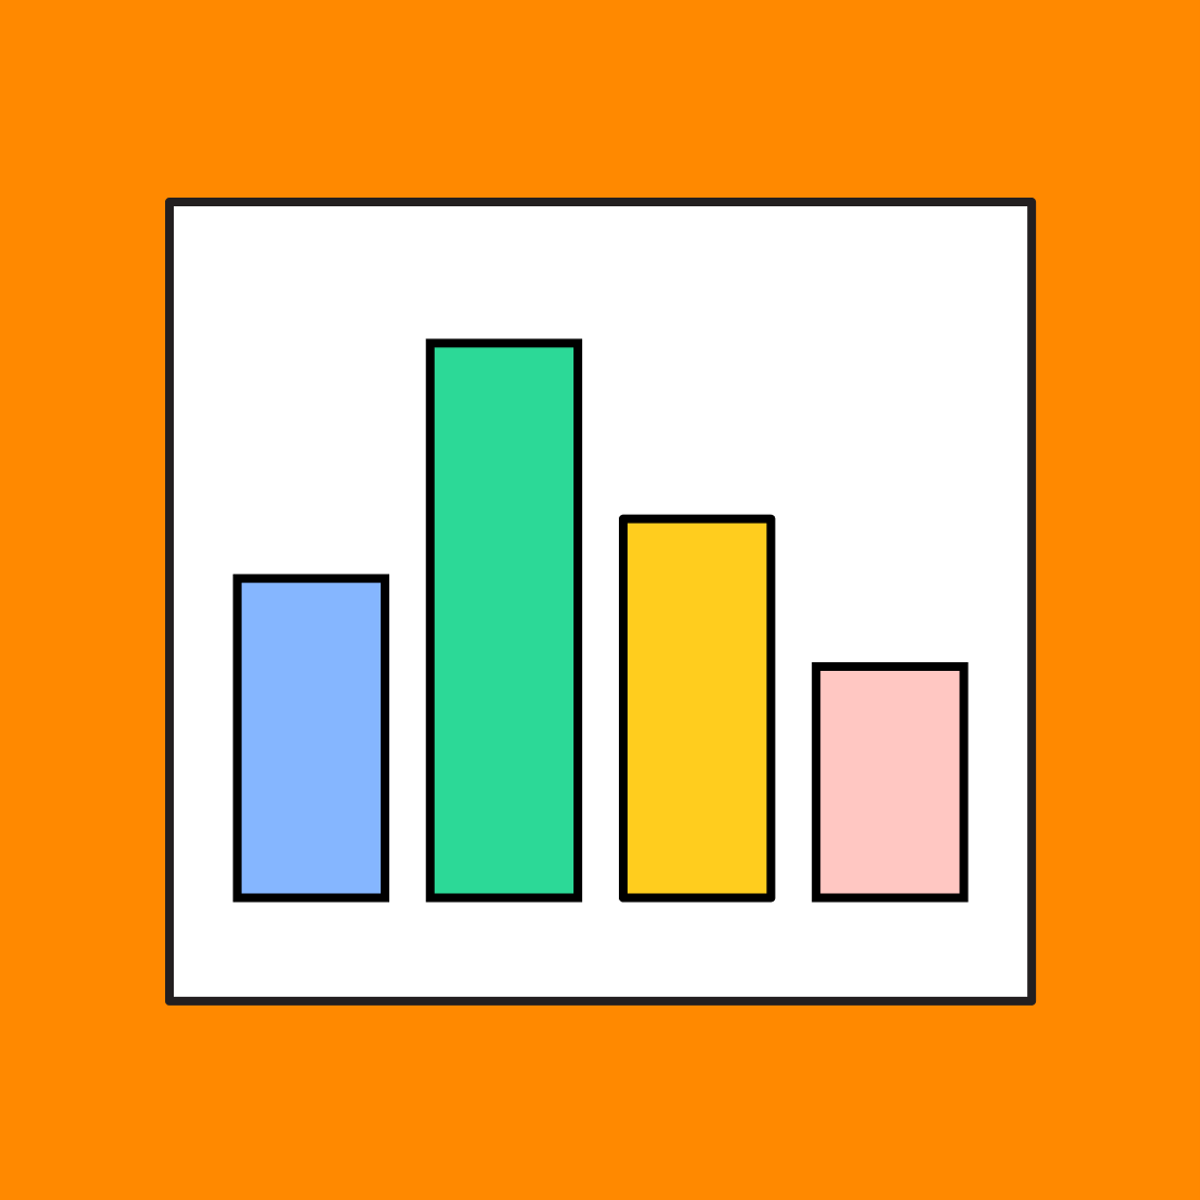 blank bar graph template graphing